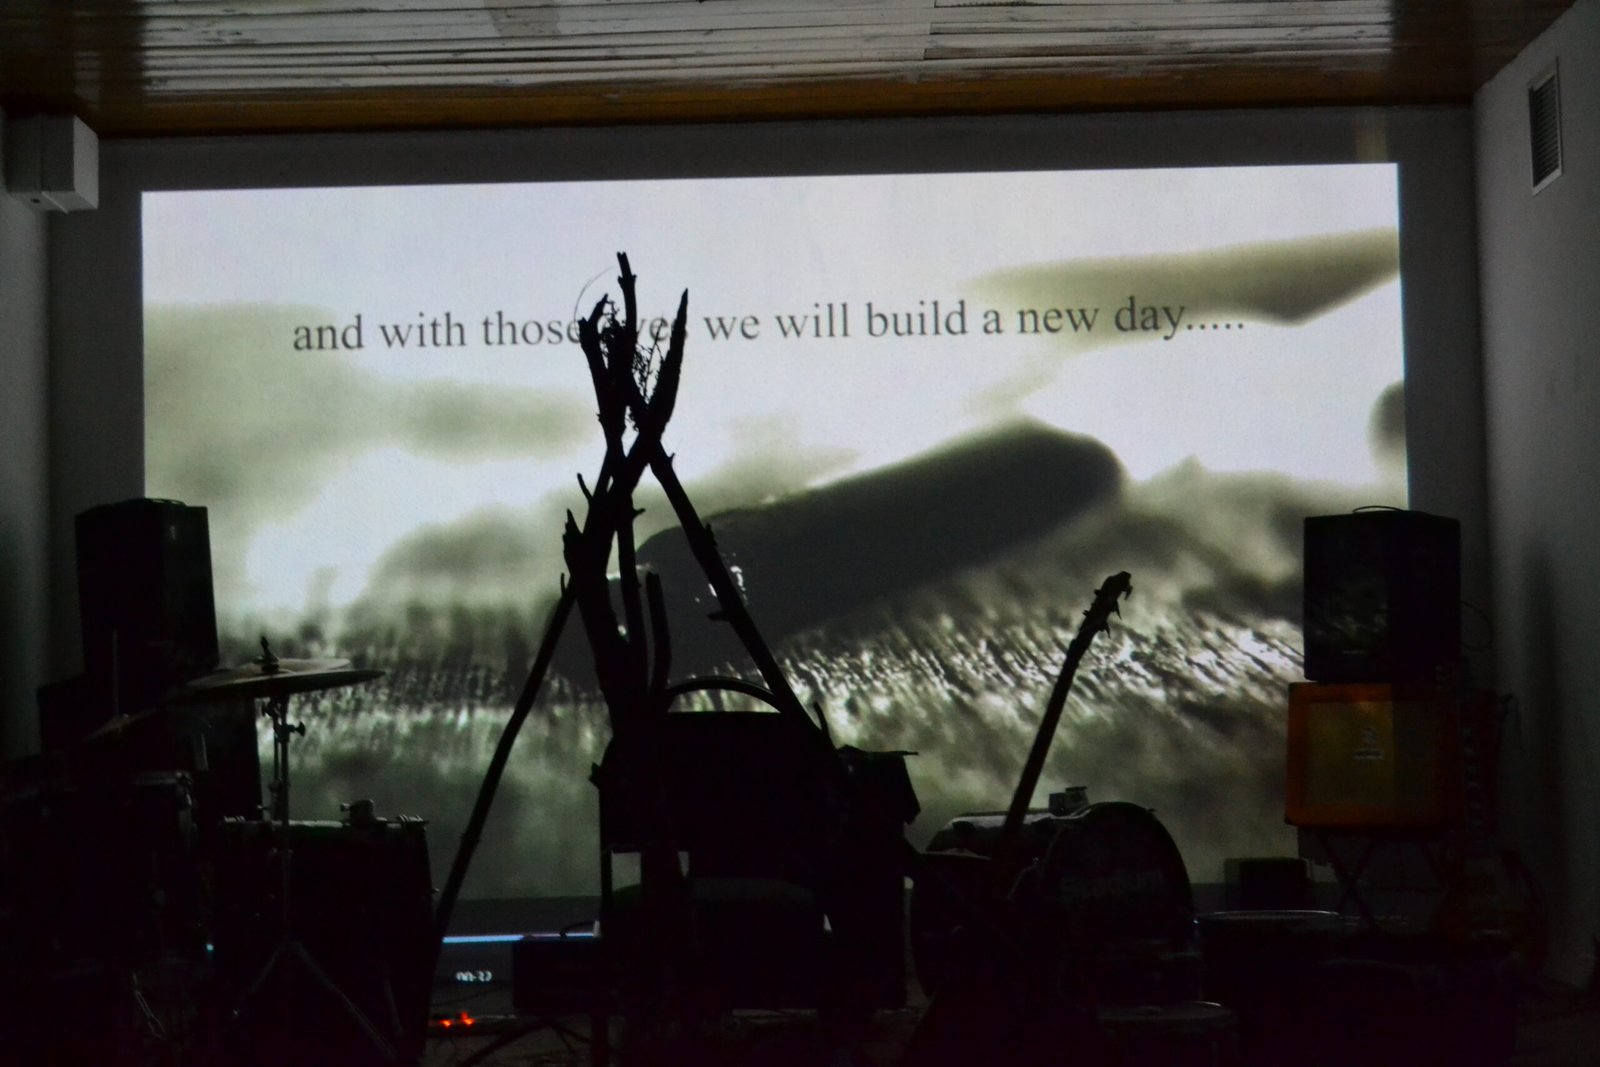 Morning Pages' live performance set-up of instruments and internally produced projected video at 'Untrammelled' exhibition at Gallery of the University of Stellenbosch (GUS). Image by Caitlin Mkhasibe